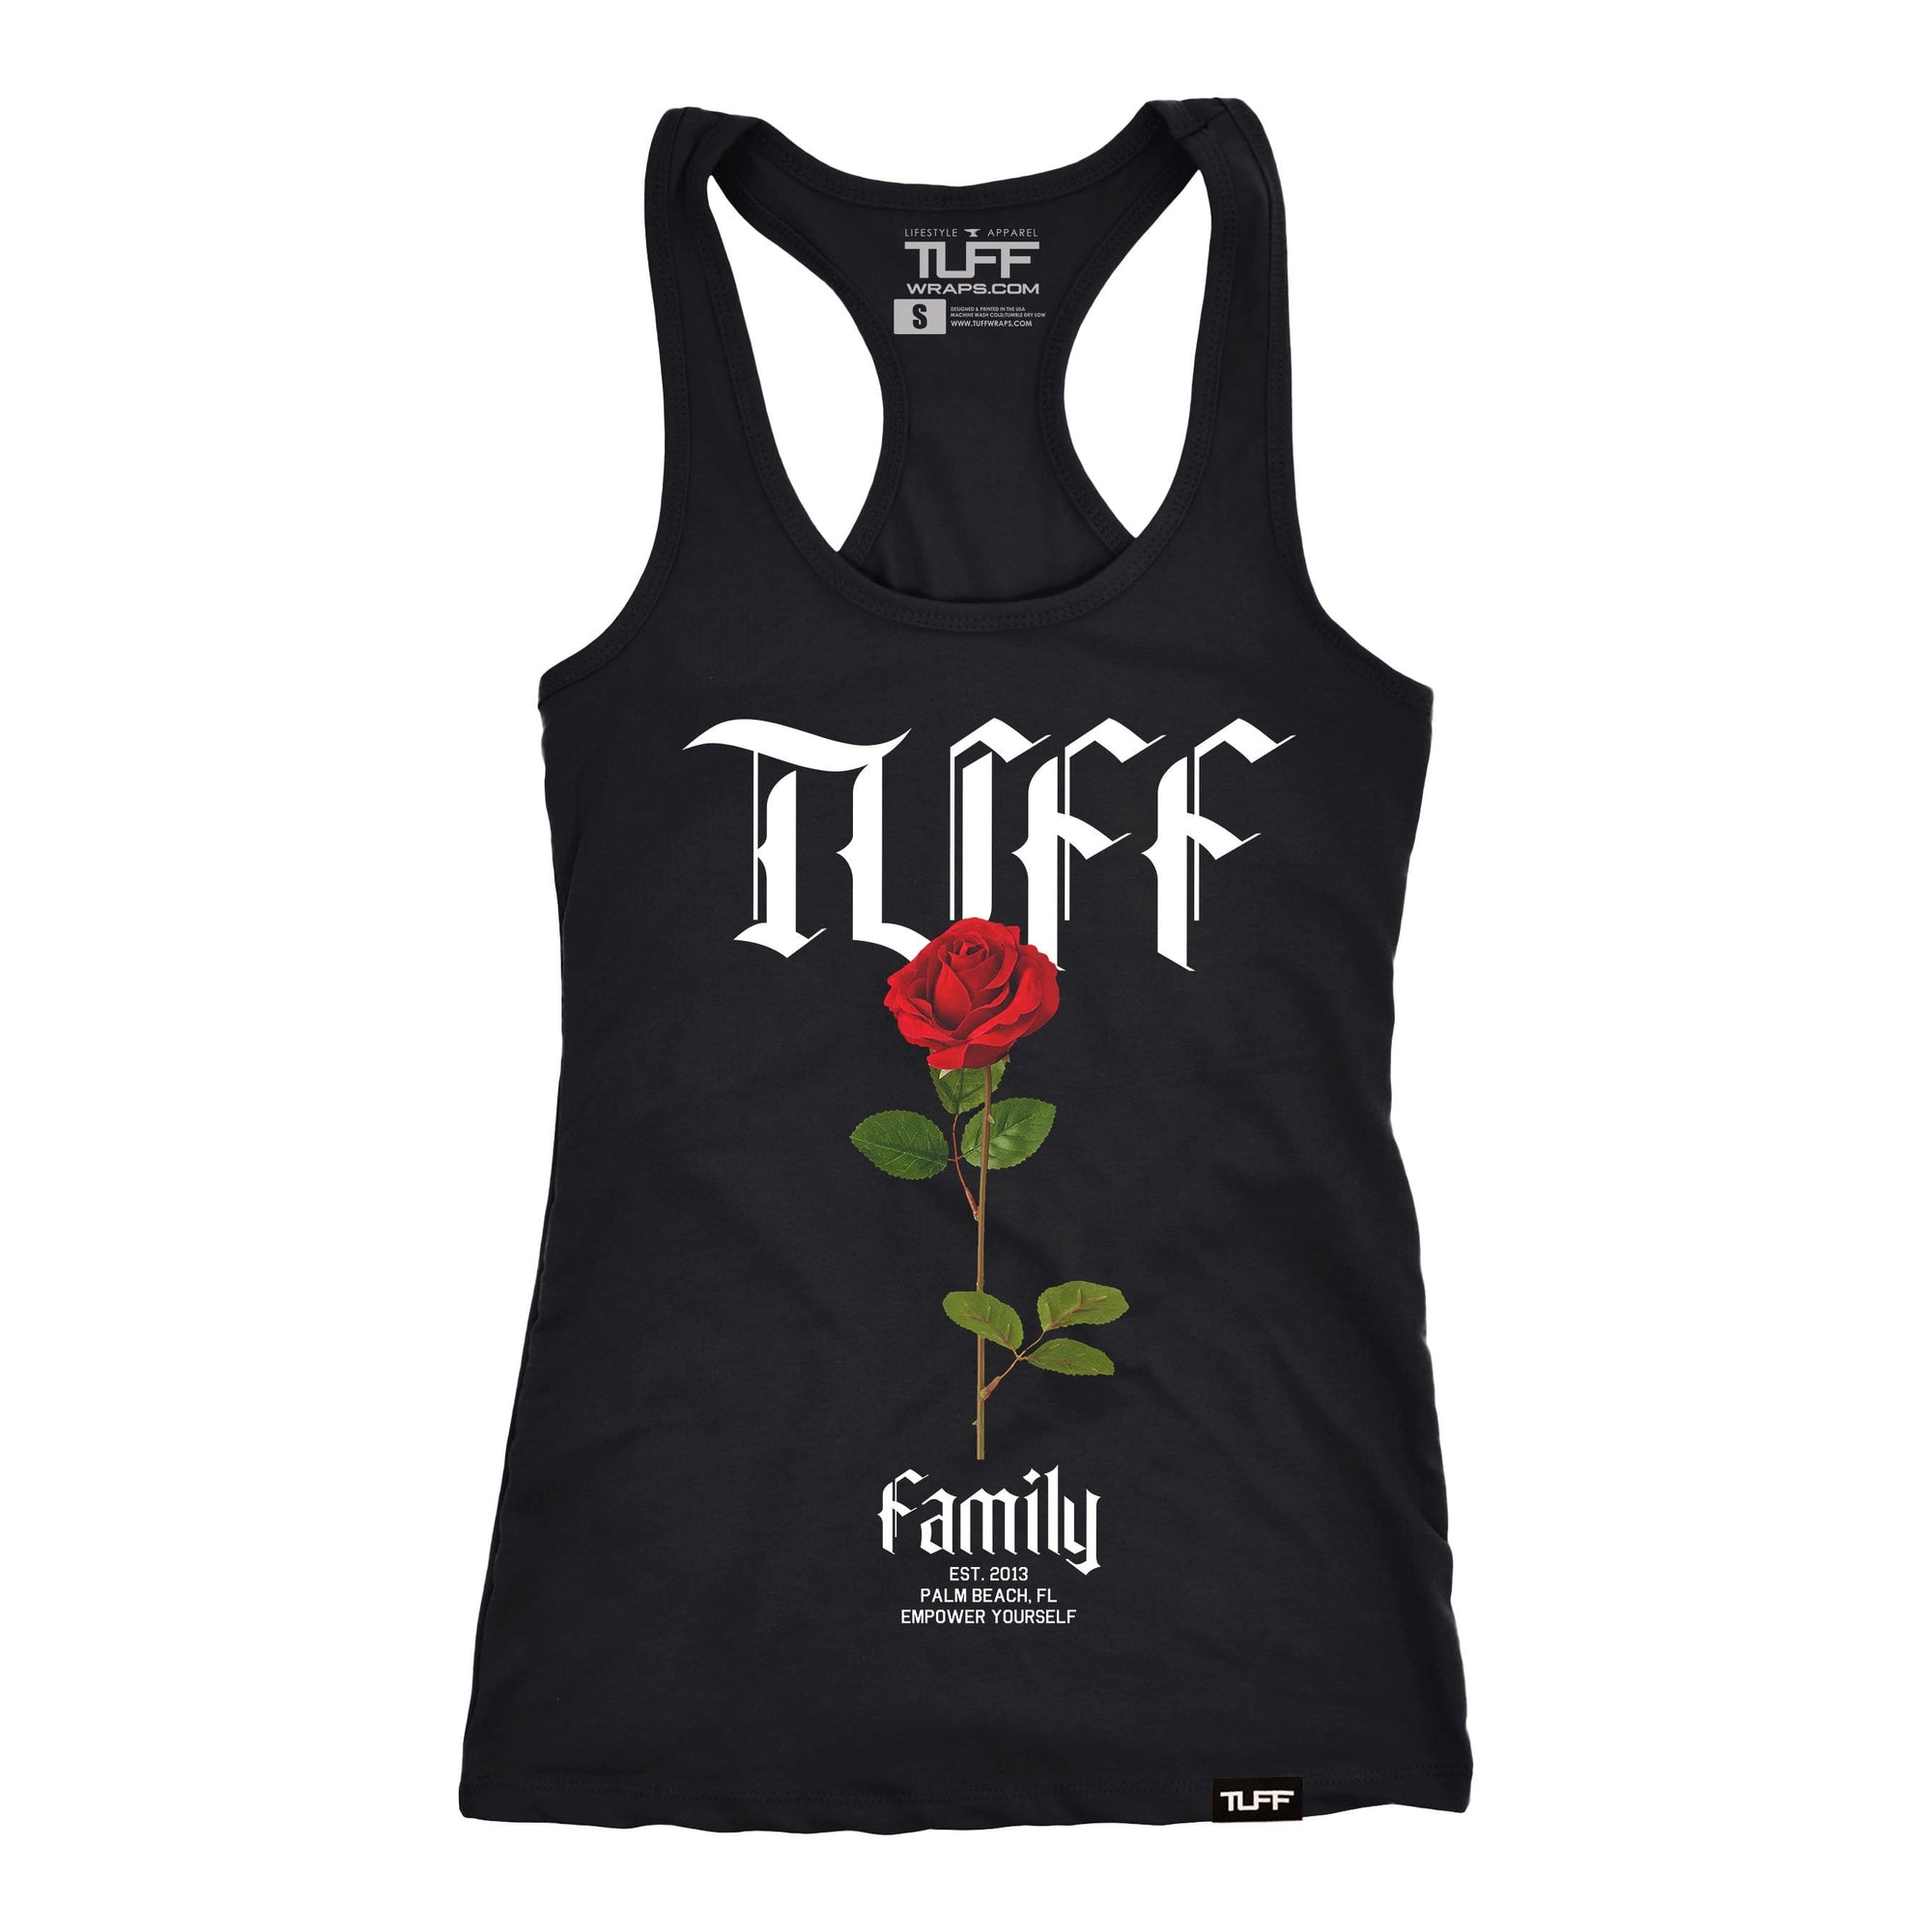 TEAM TAY TAY - PREMIUM WOMEN'S RACERBACK TANK TOP - BLACK - PQH4AM The  Wolf's Den Official Store